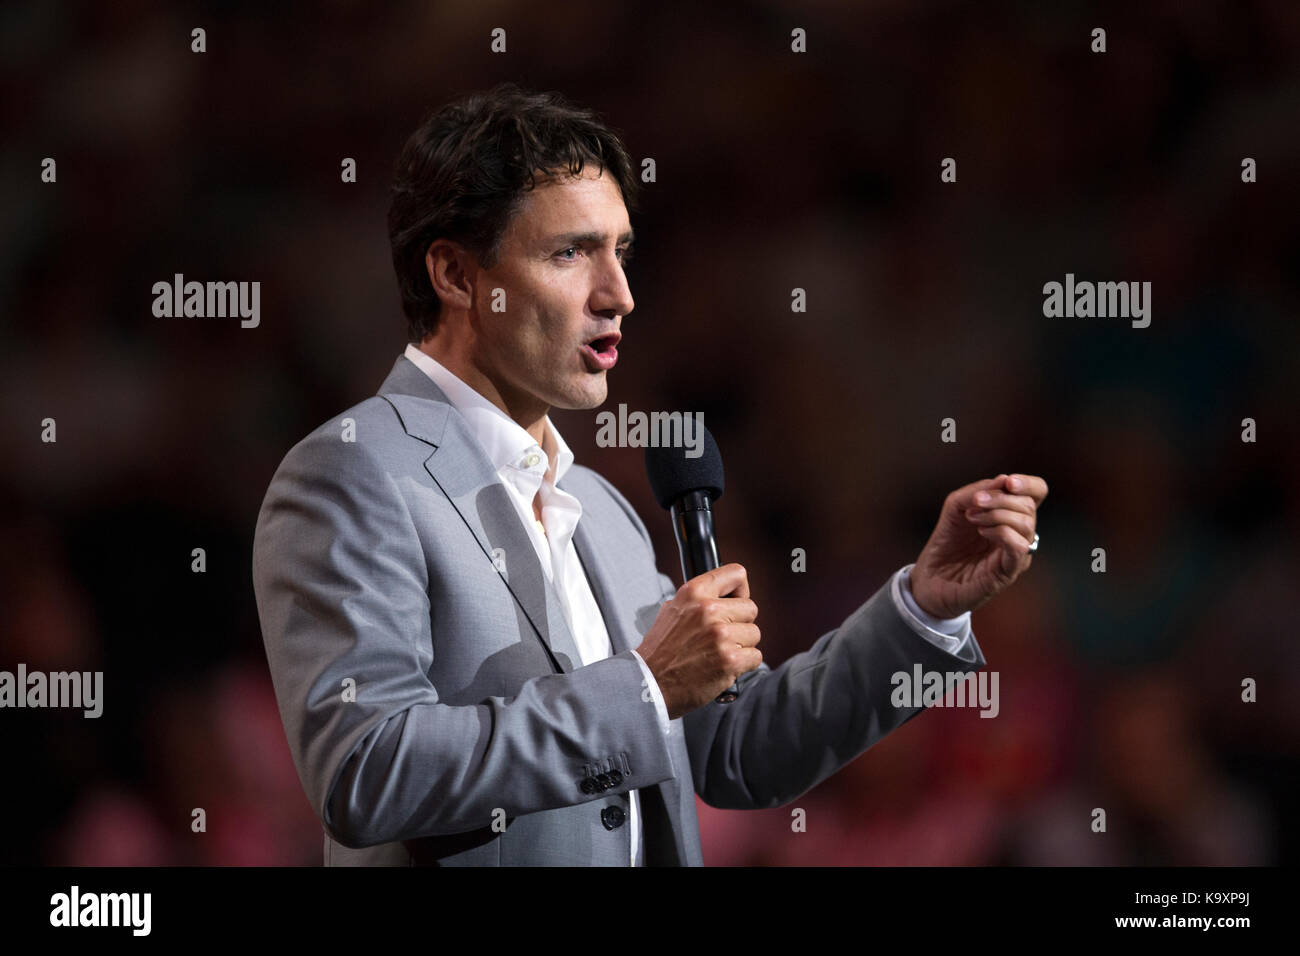 Canada’s Prime Minister Justin Trudeau speaks during the 2017 Invictus Games opening ceremonies in Toronto, Canada Sept. 23, 2017. Stock Photo